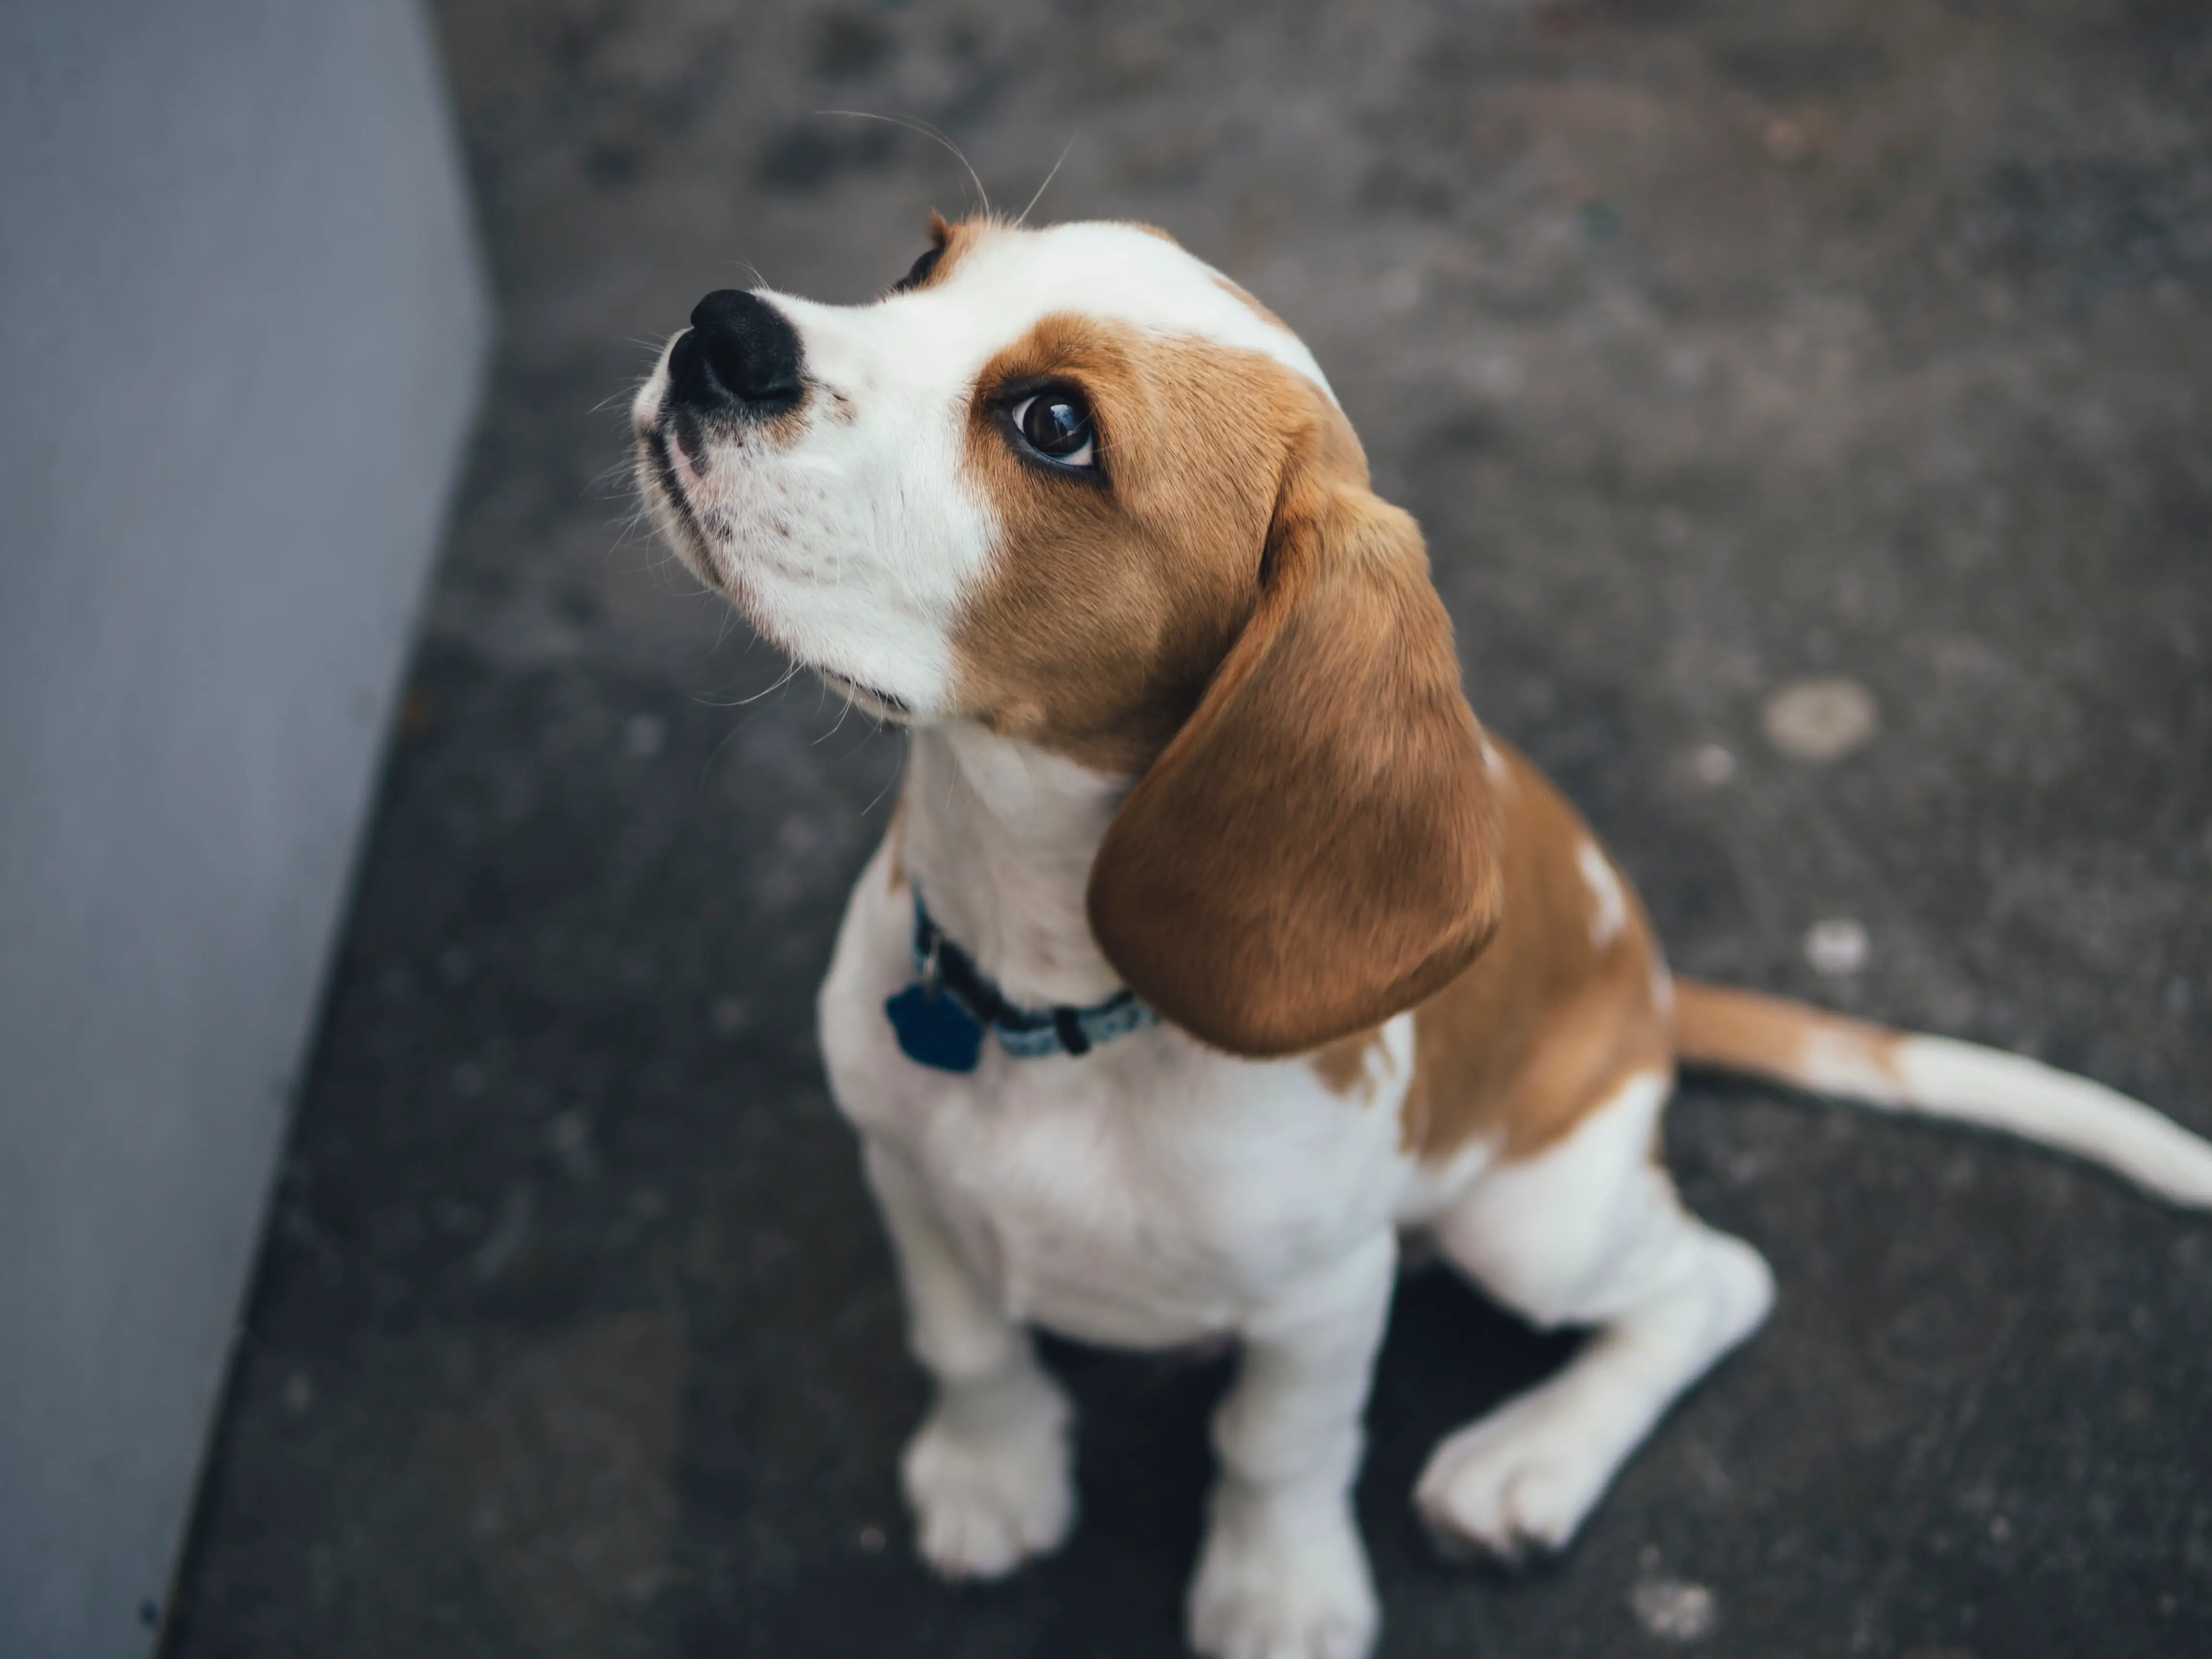 Puppy Training Biting: When to Start and How |